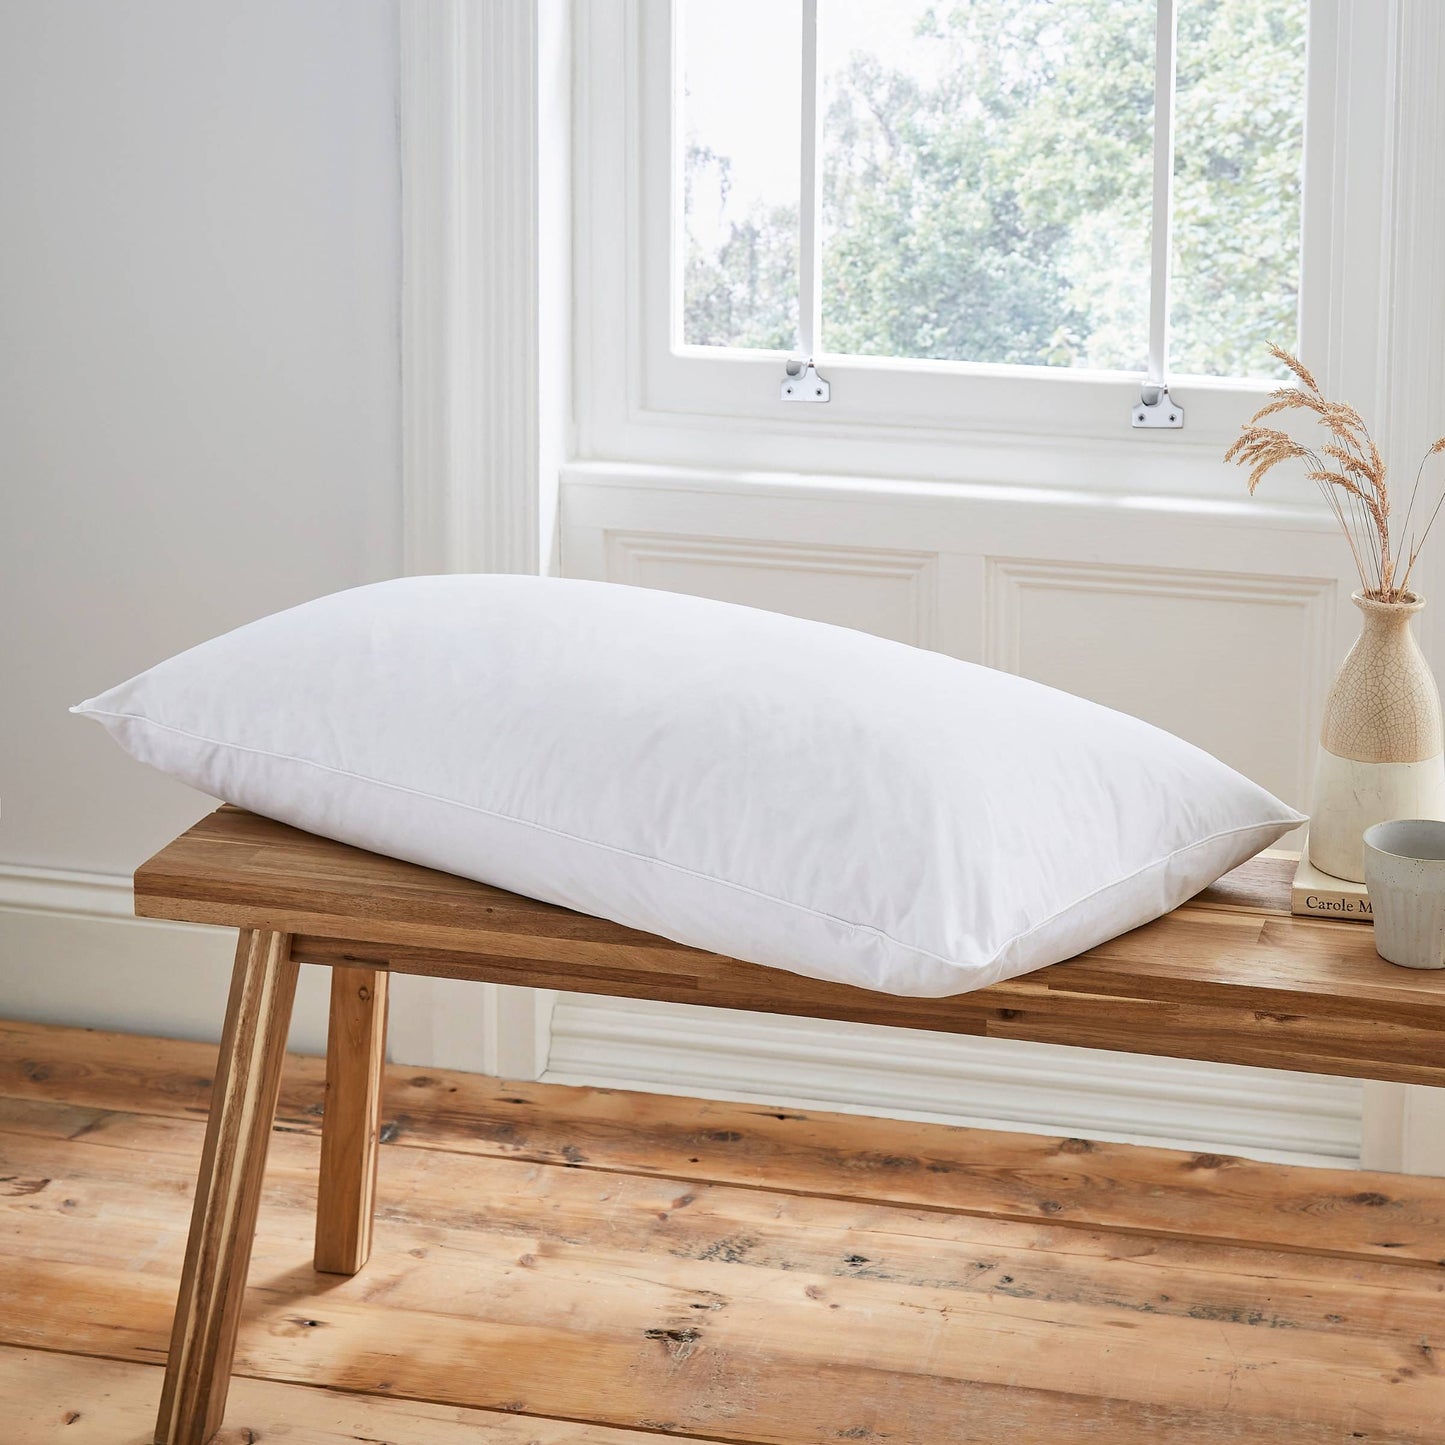 Superior Feather King Pillow